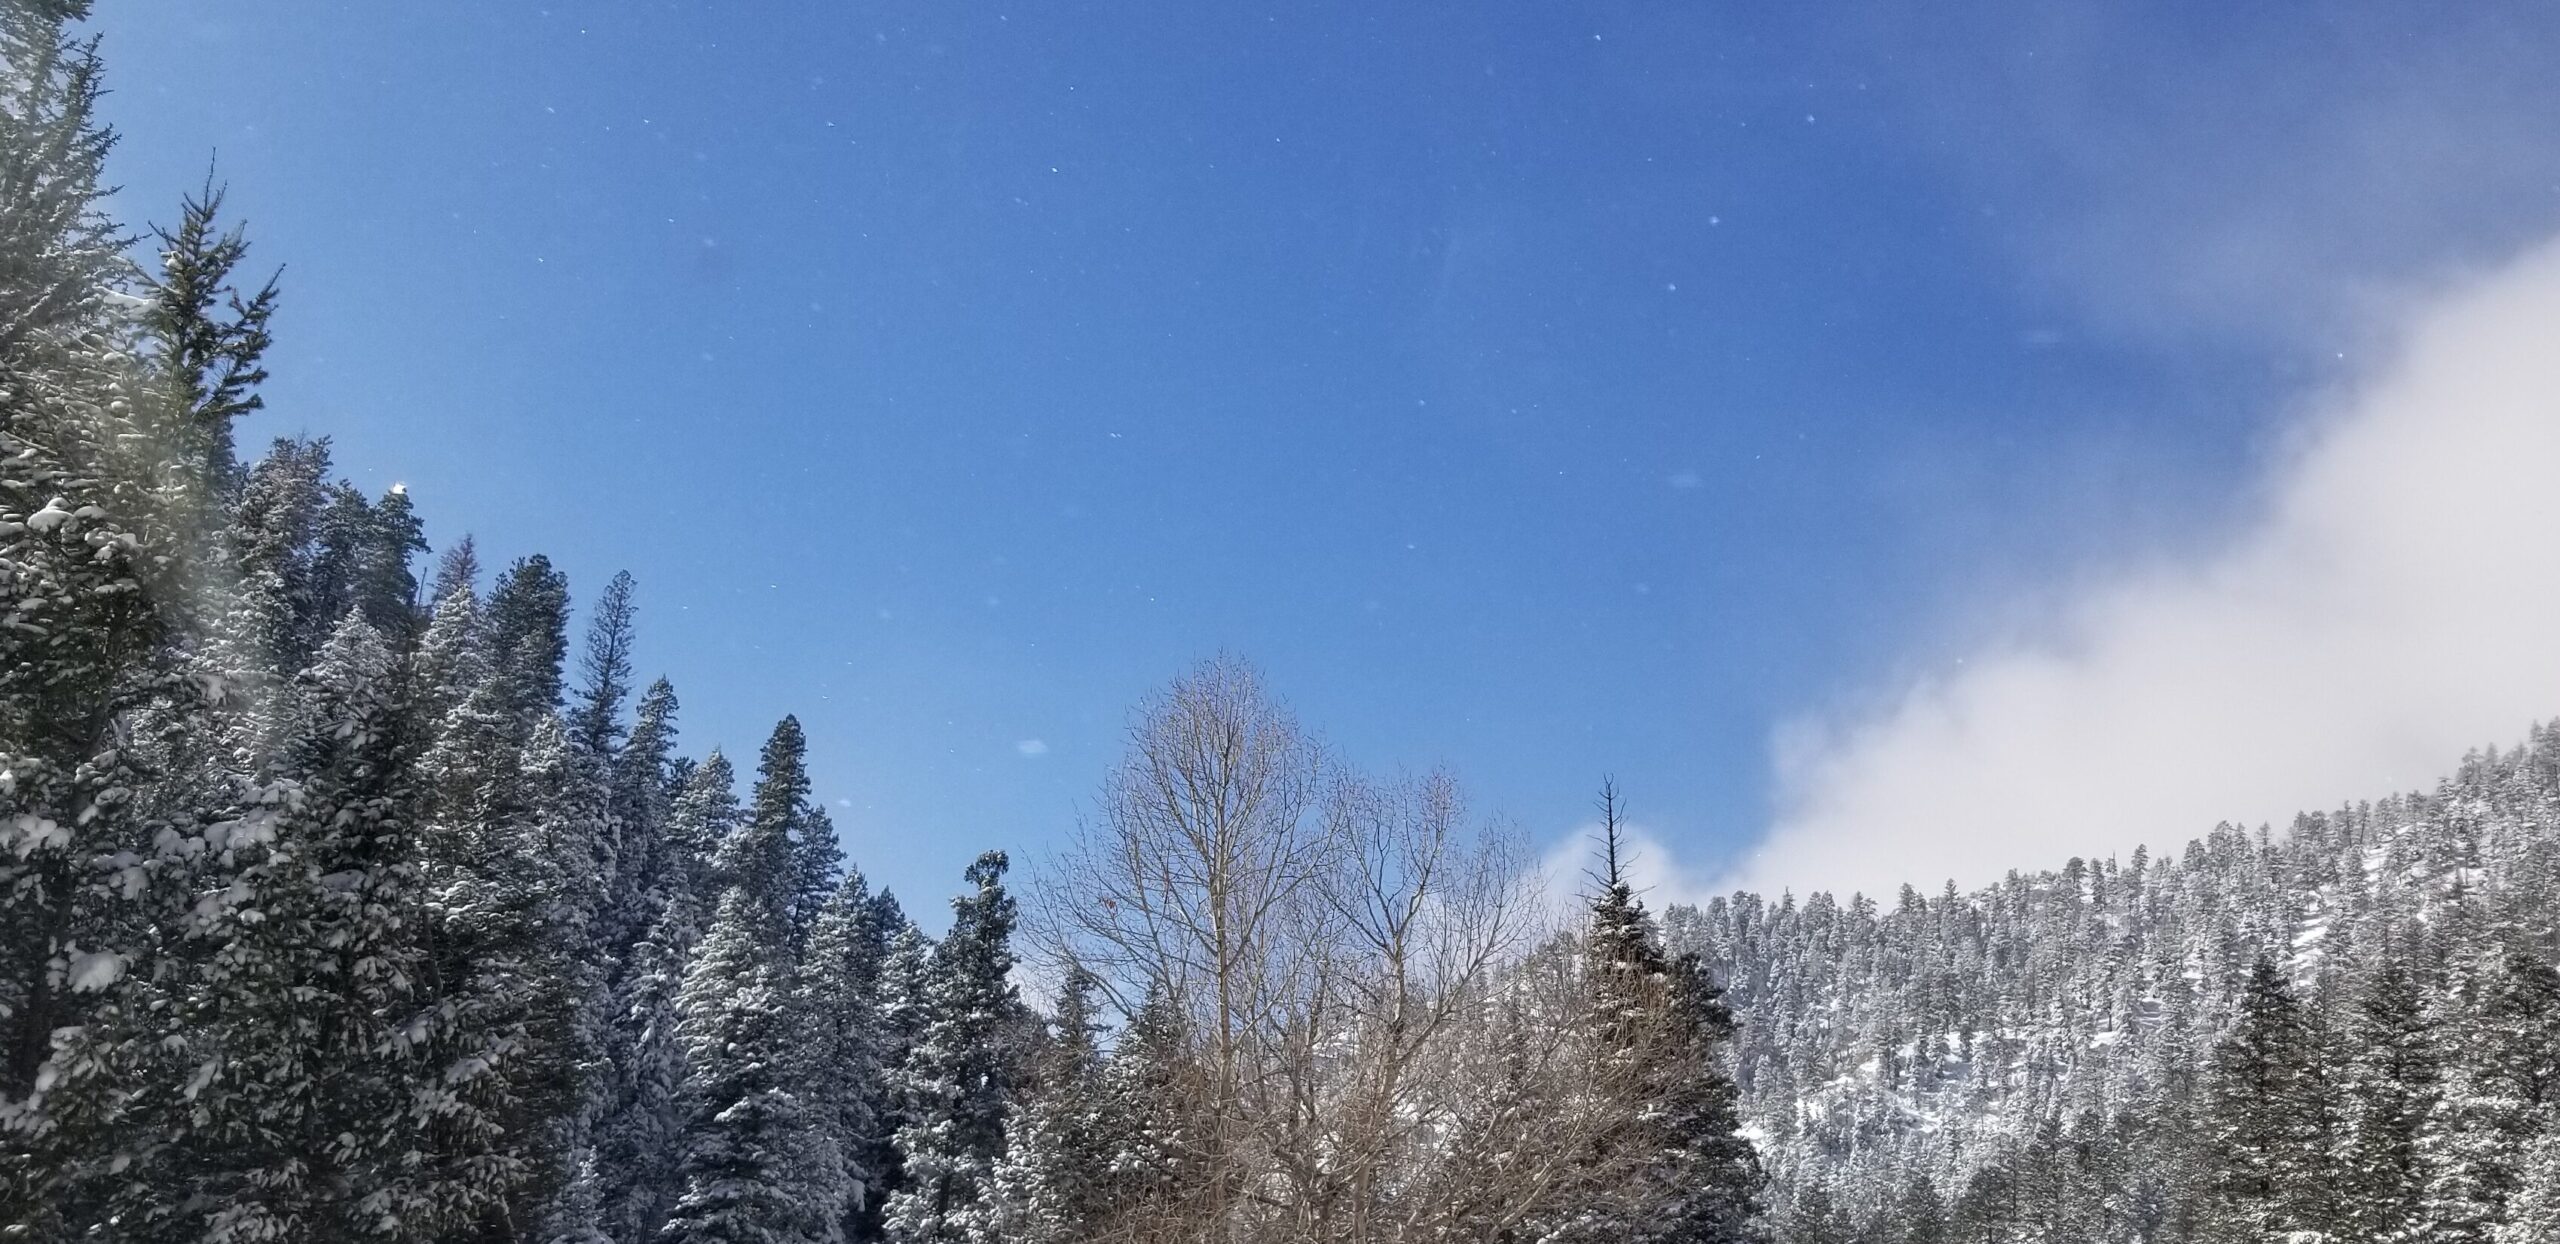 Photo of a snowy day looking at the treeline of snow covered pines in Colorado with a blue sky  and some cloud cover.